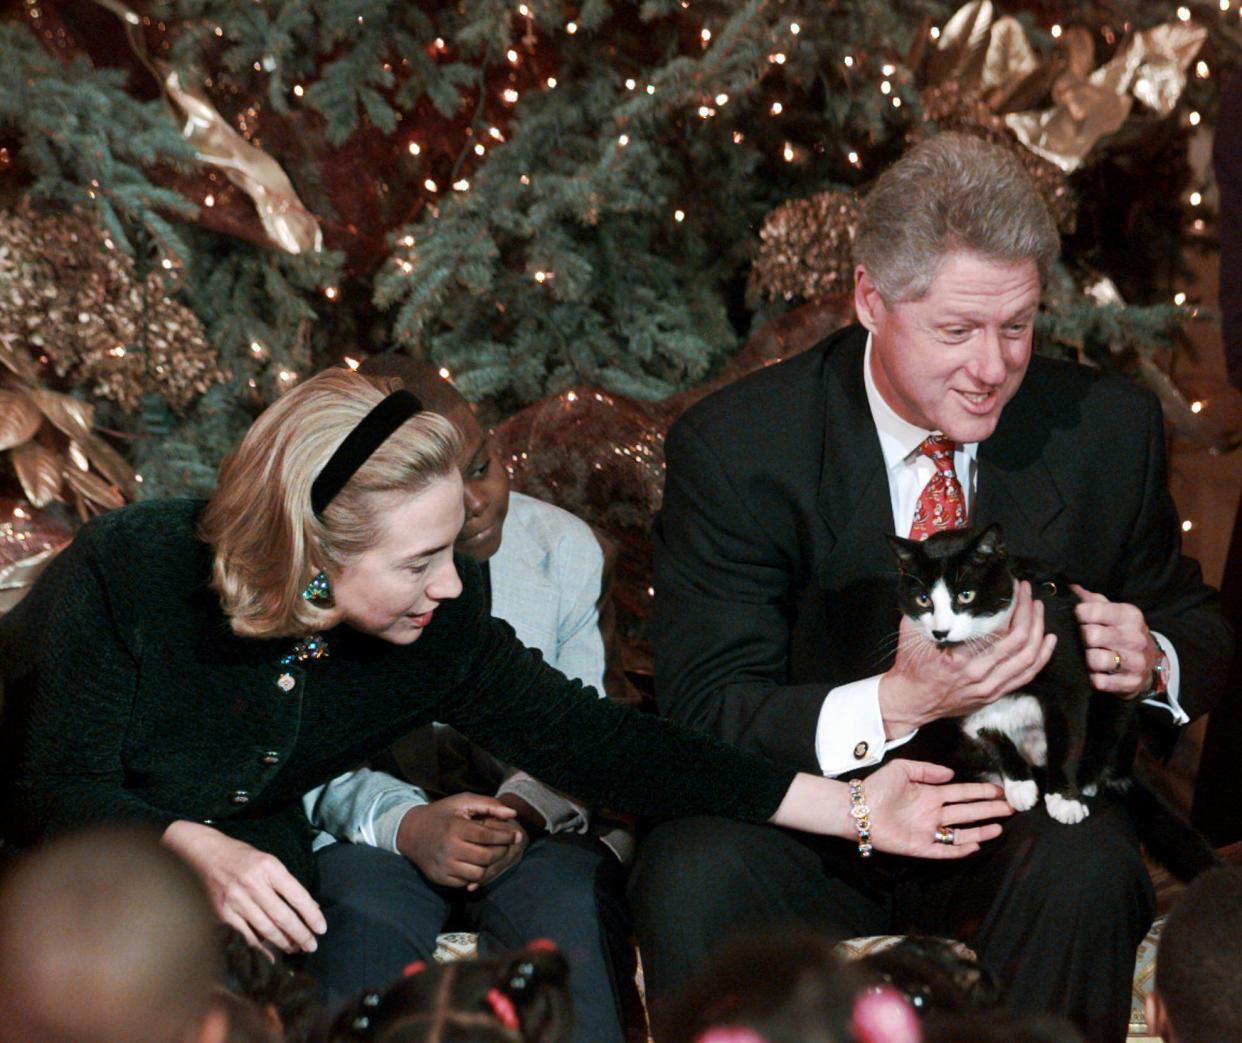 In this Dec. 20, 1996, file photo President Clinton holds Socks the cat as he and first lady Hillary Clinton host Washington area elementary school children at the White House where the president read "Twas the Night Before Christmas." The arrival of the Biden pets will also mark the next chapter in a long history of pets residing at the White House after a four-year hiatus during the Trump administration. “Pets have always played an important role in the White House throughout the decades,” said Jennifer Pickens, an author who studies White House traditions.  (AP Photo/Ruth Fremson, File)